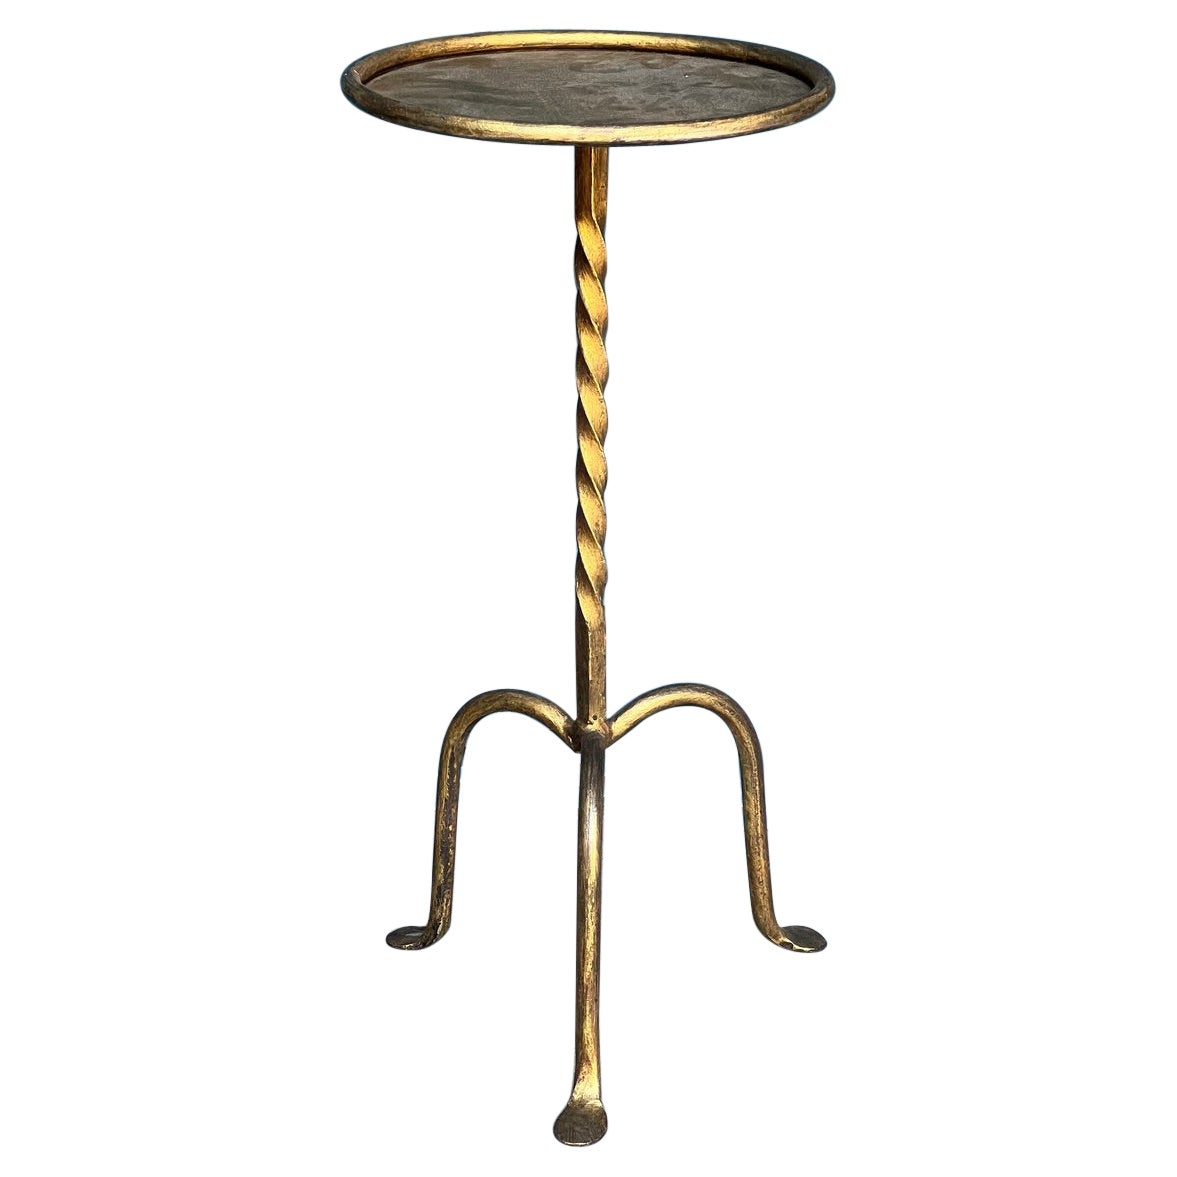 Gilt Iron Martini Table With a Twisted Stem